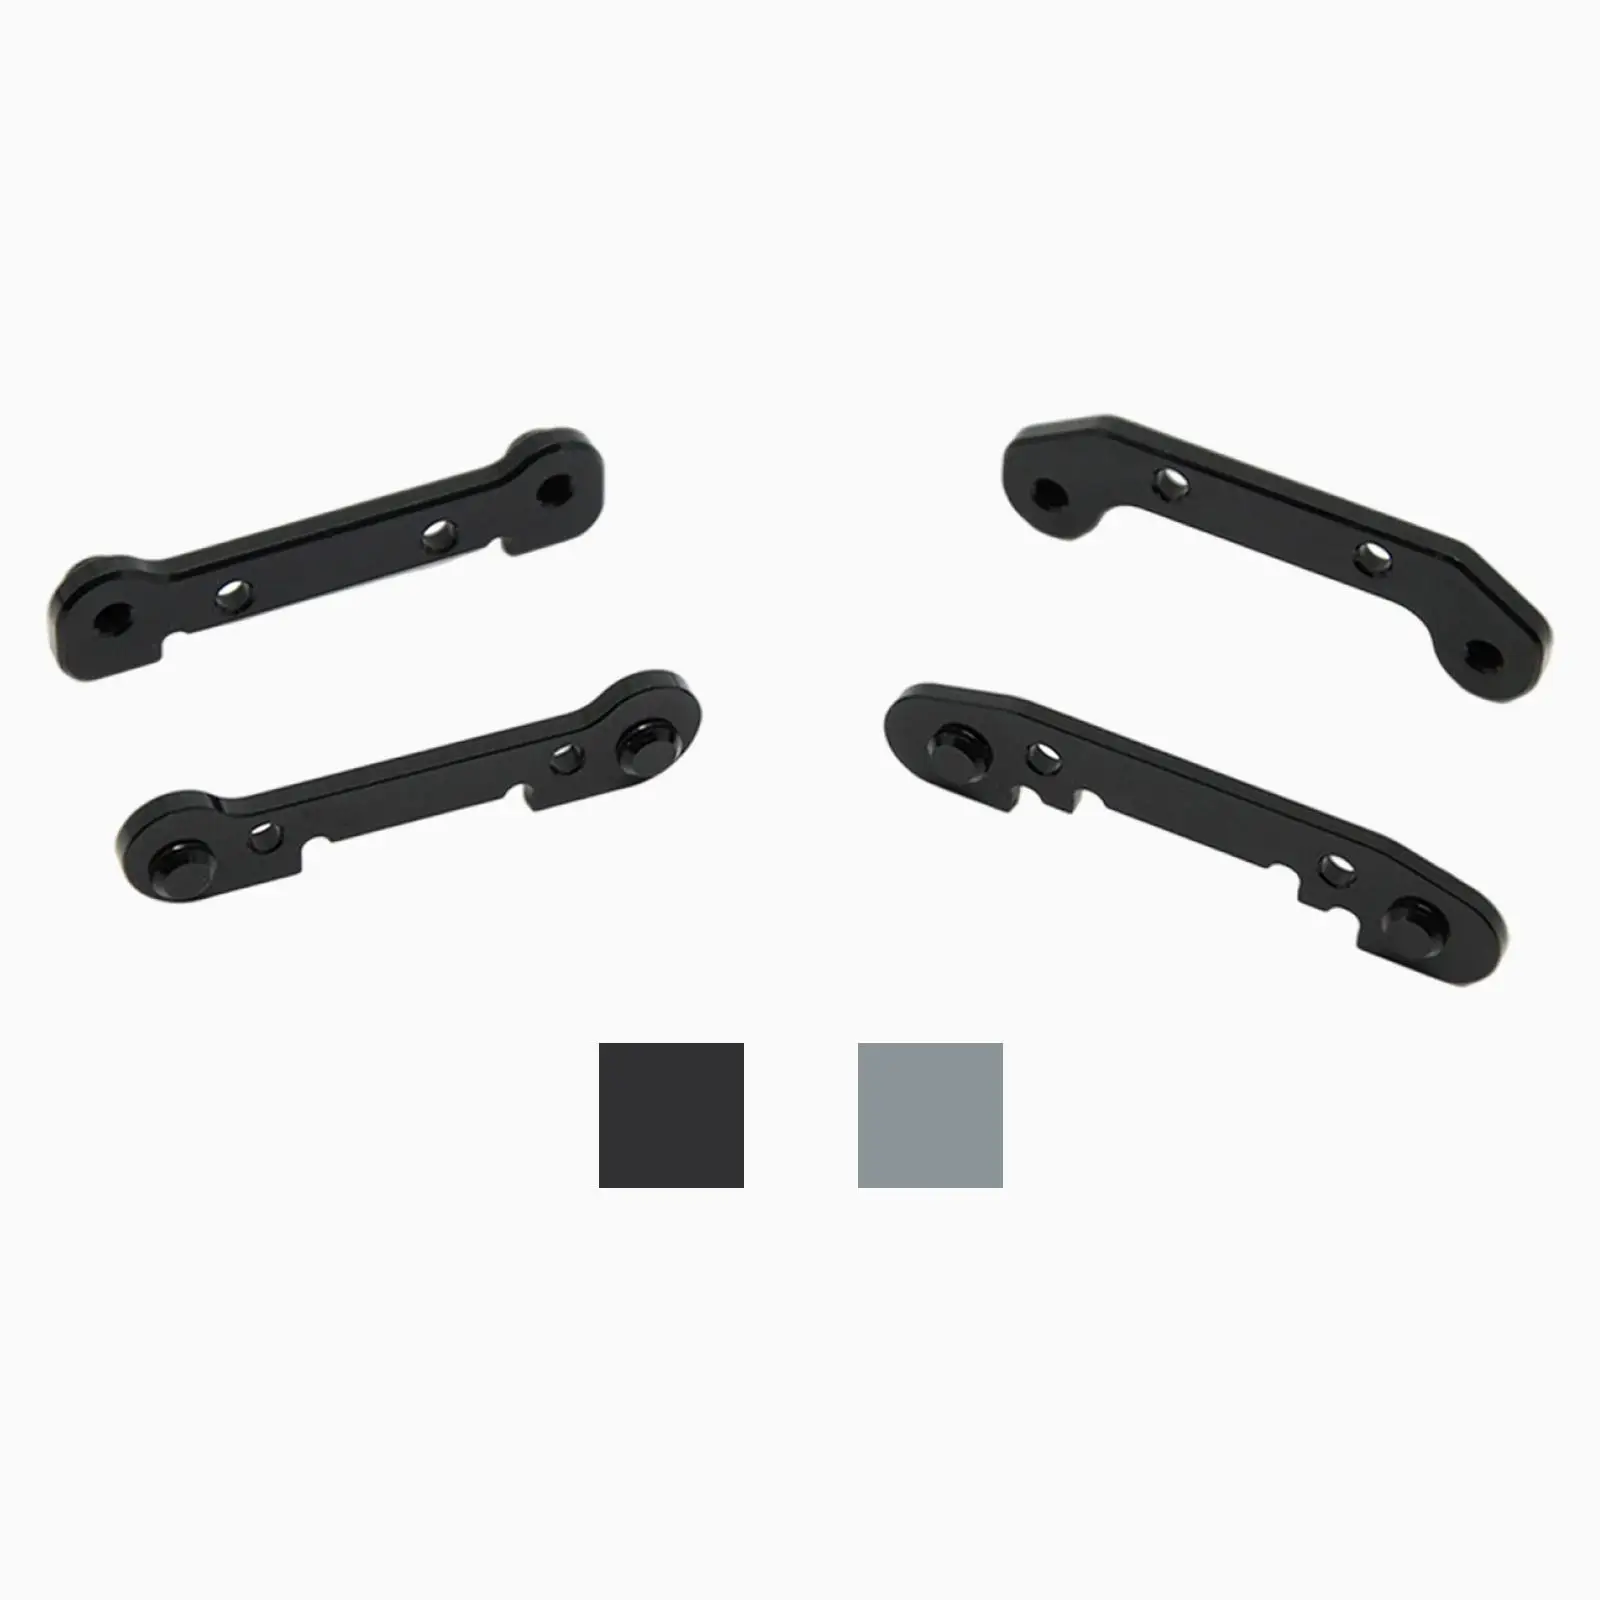 4 Pieces 37mm Reinforced Swing Arm Spare Parts Reinforcement Kit for Wltoys 124016 124017 124018 124019 1:12 RC Car Replacement